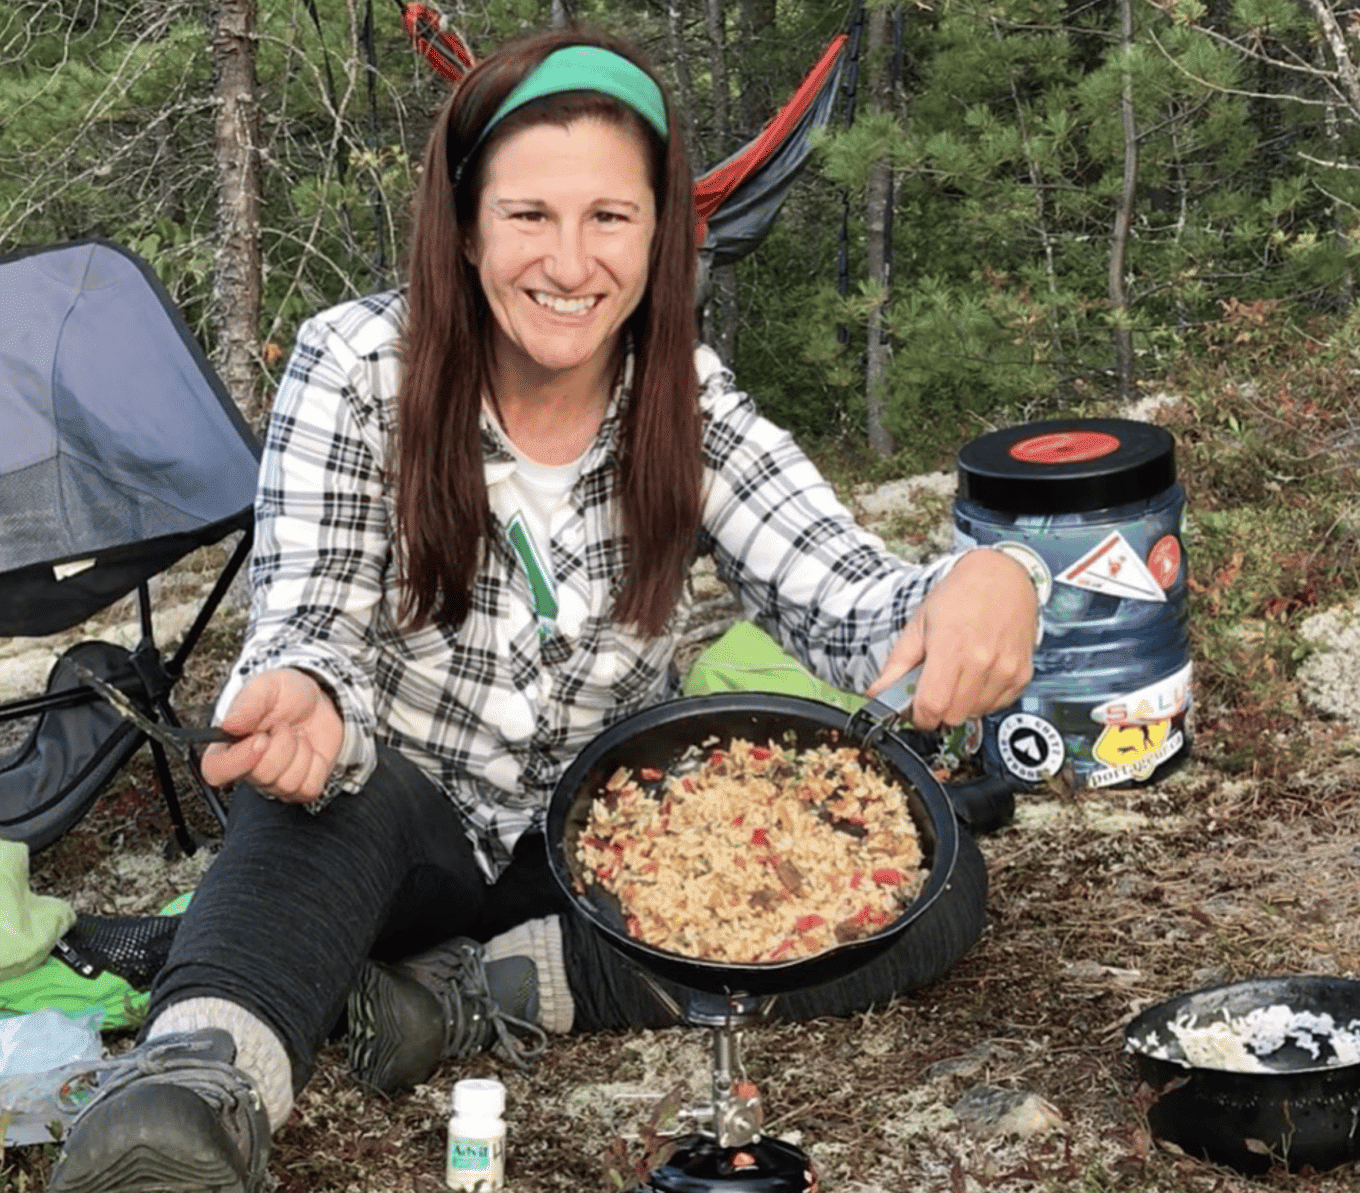 Cooking a feast in the backcountry